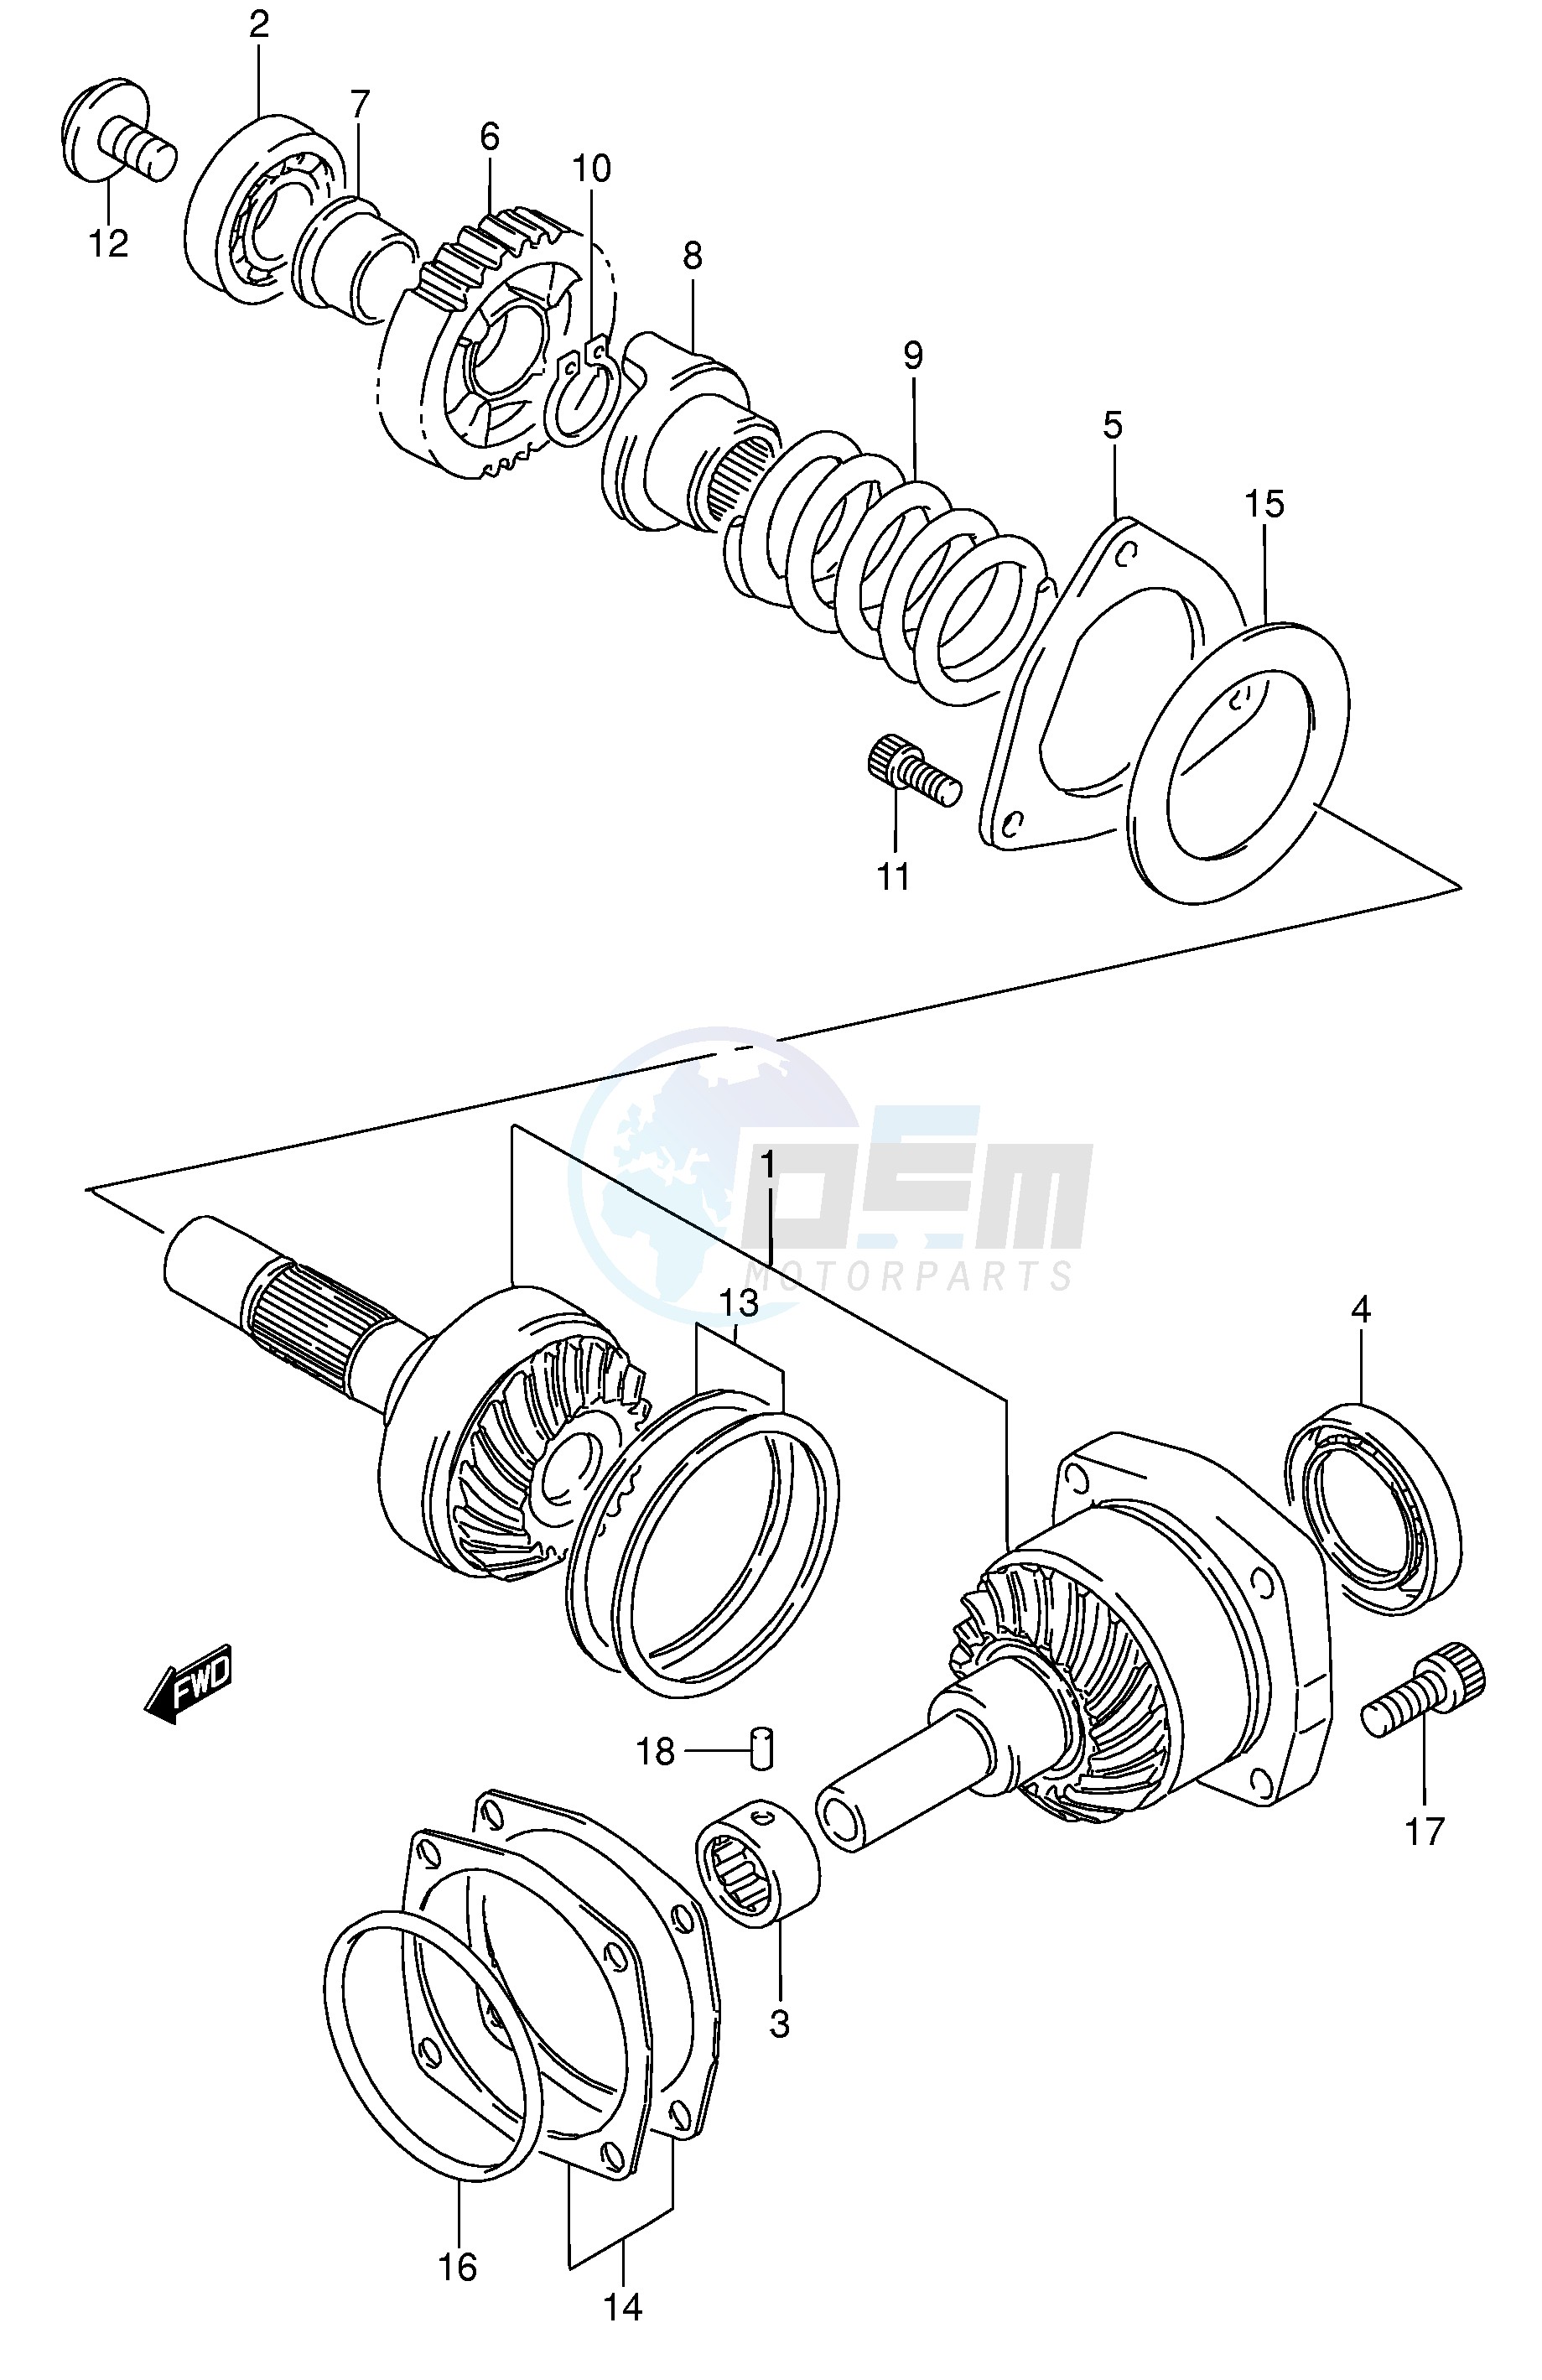 SECONDARY DRIVE GEAR image